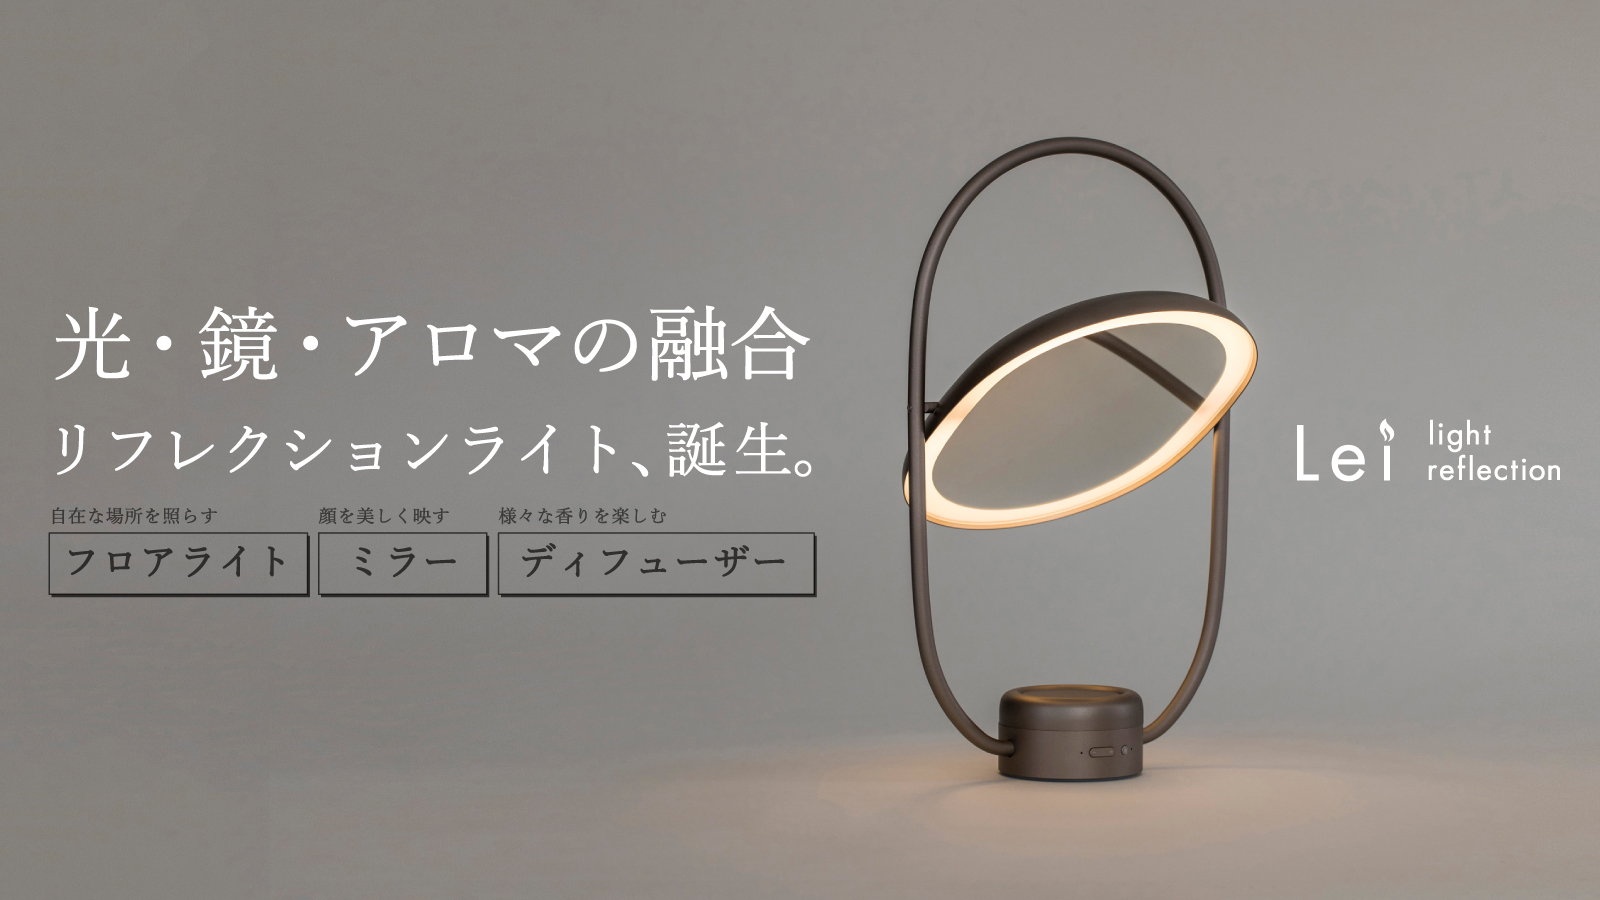 New release 「Lei light reflection」 – Lei – non electric